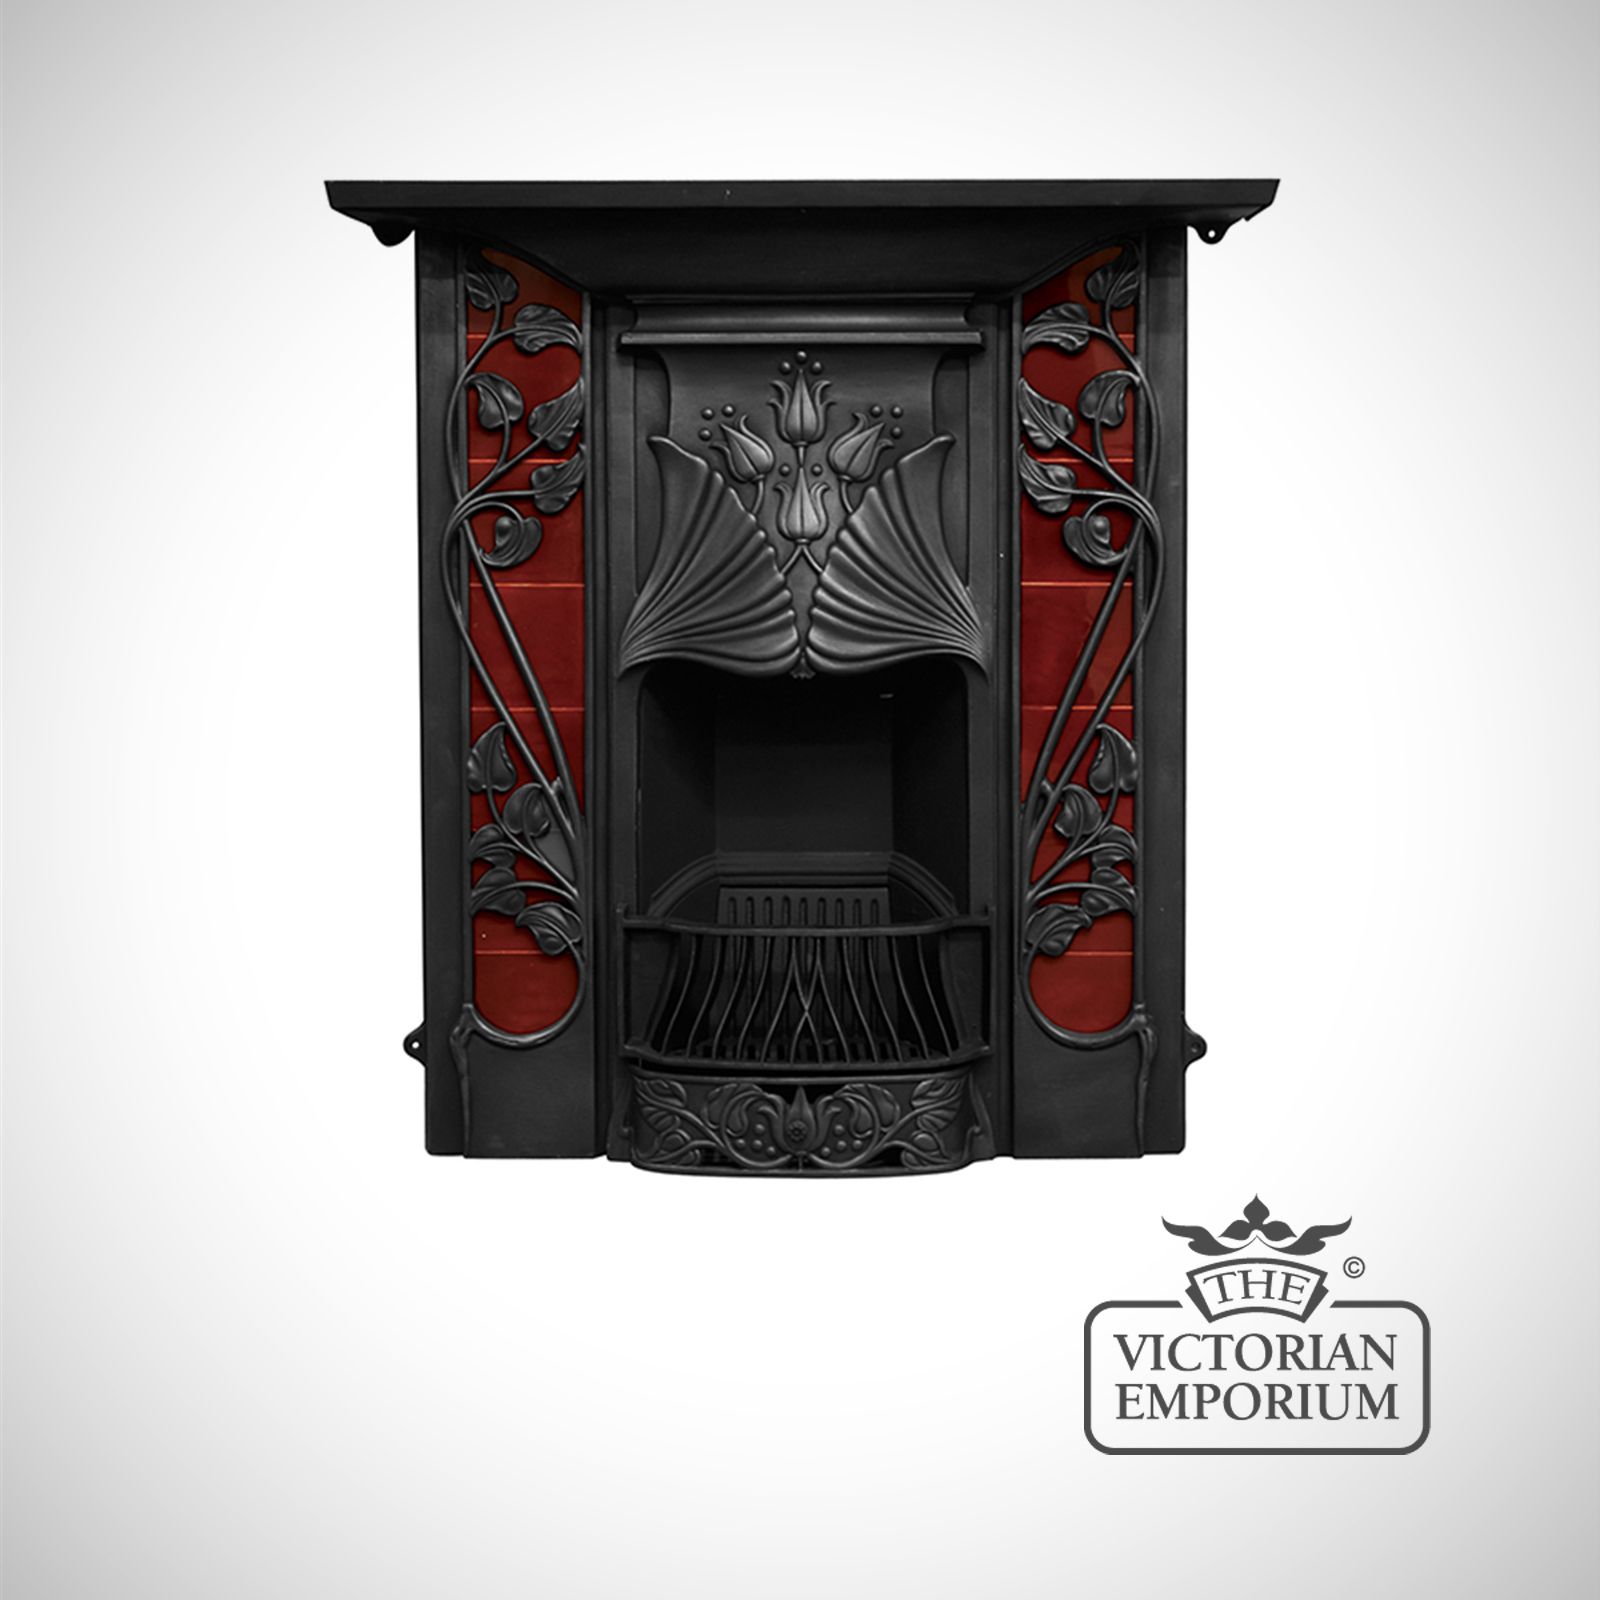 The Toulouse Art Nouveau style cast iron fireplace with coloured tiles